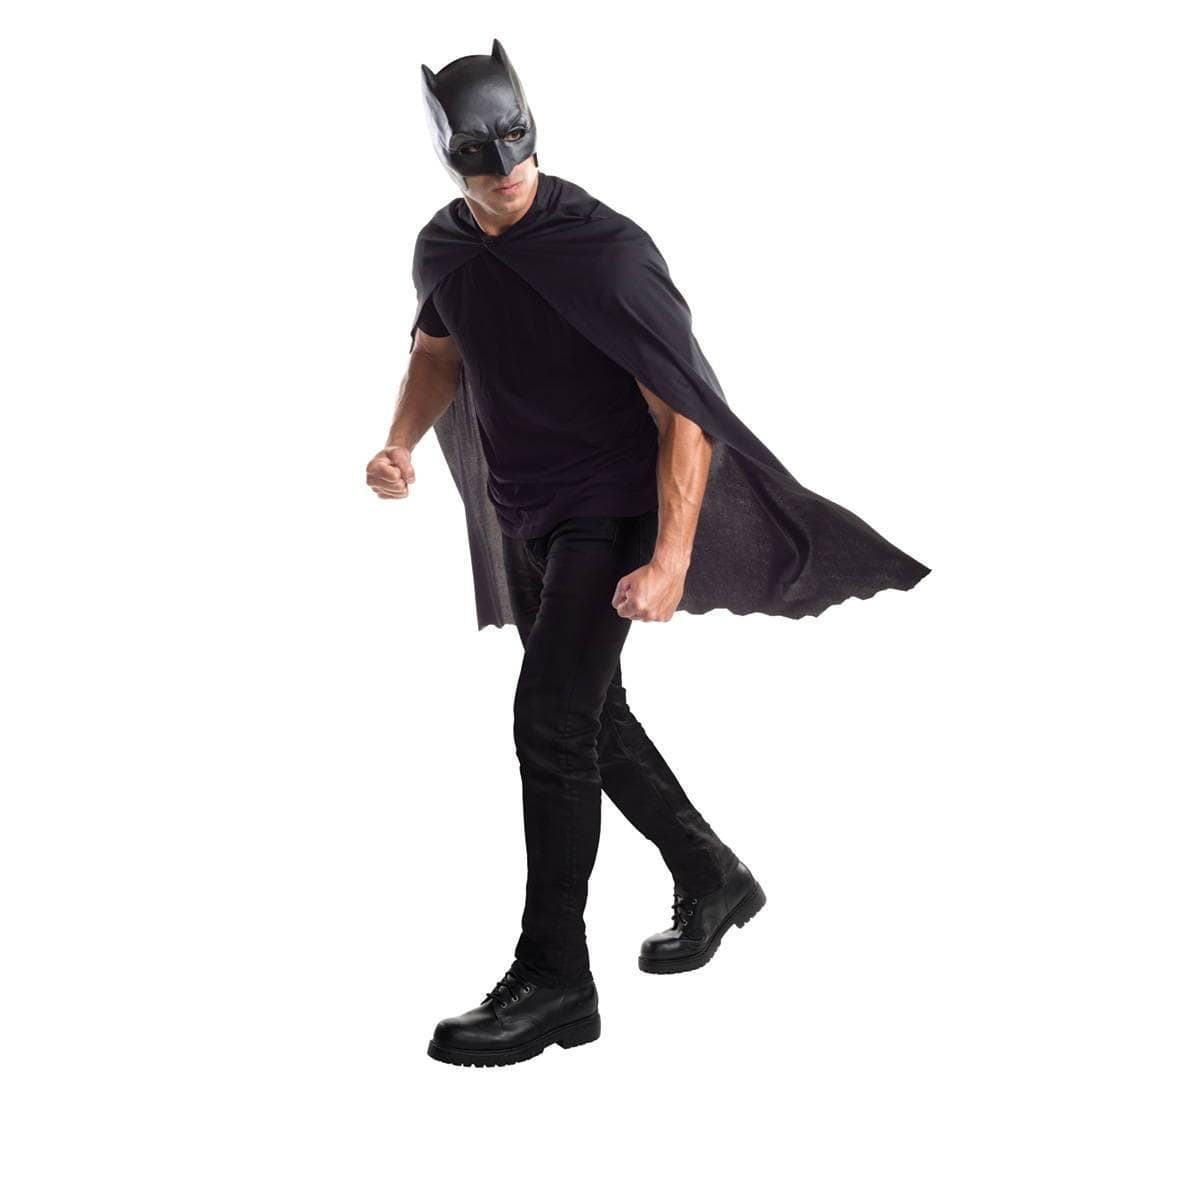 Buy Costume Accessories Batman cape with mask for men, Batman V Superman: Dawn of Justice sold at Party Expert